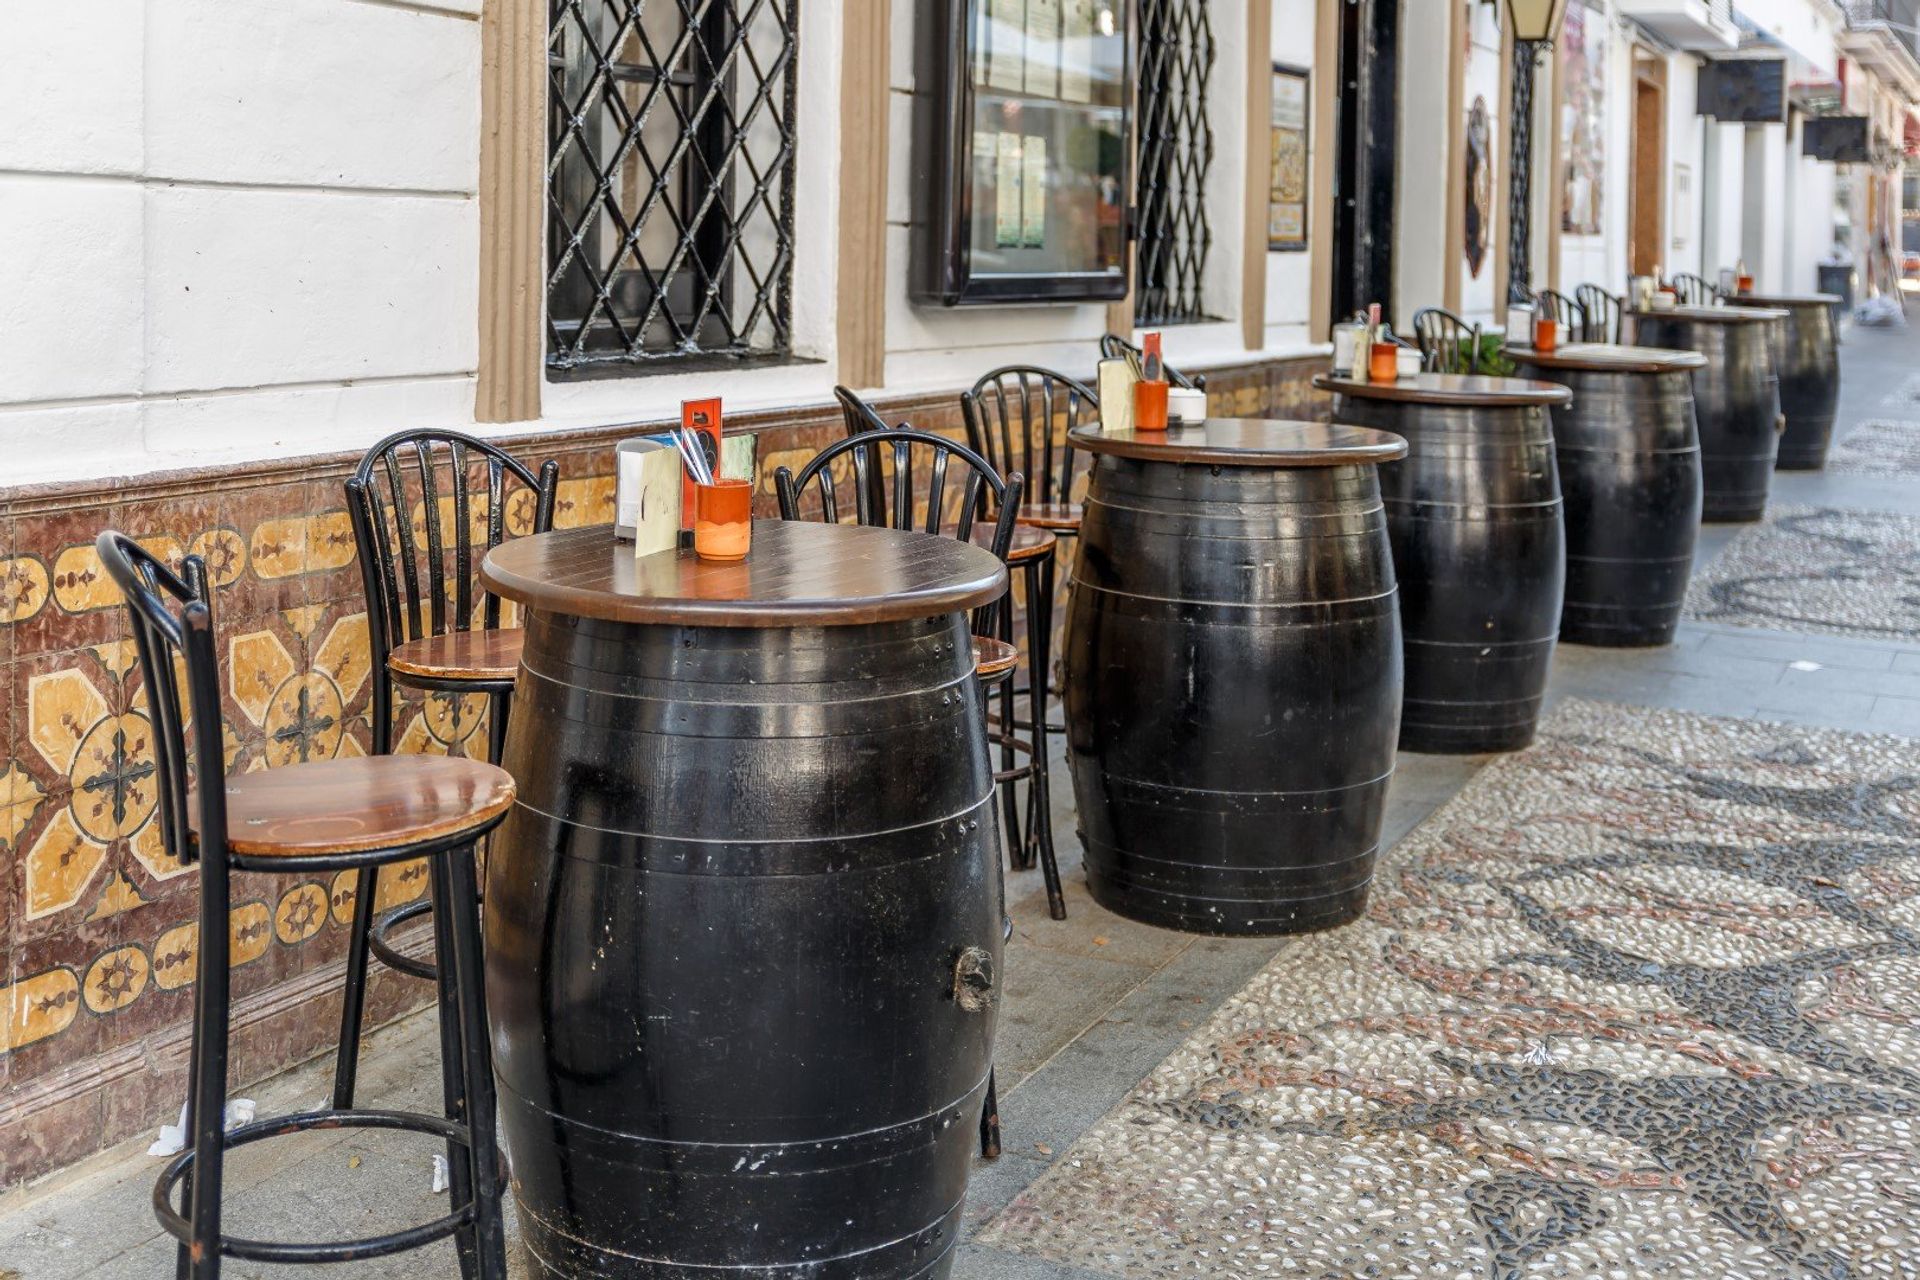 A typical Spanish bar serving traditonal tapas and beers, with oak barrel tables on the outside